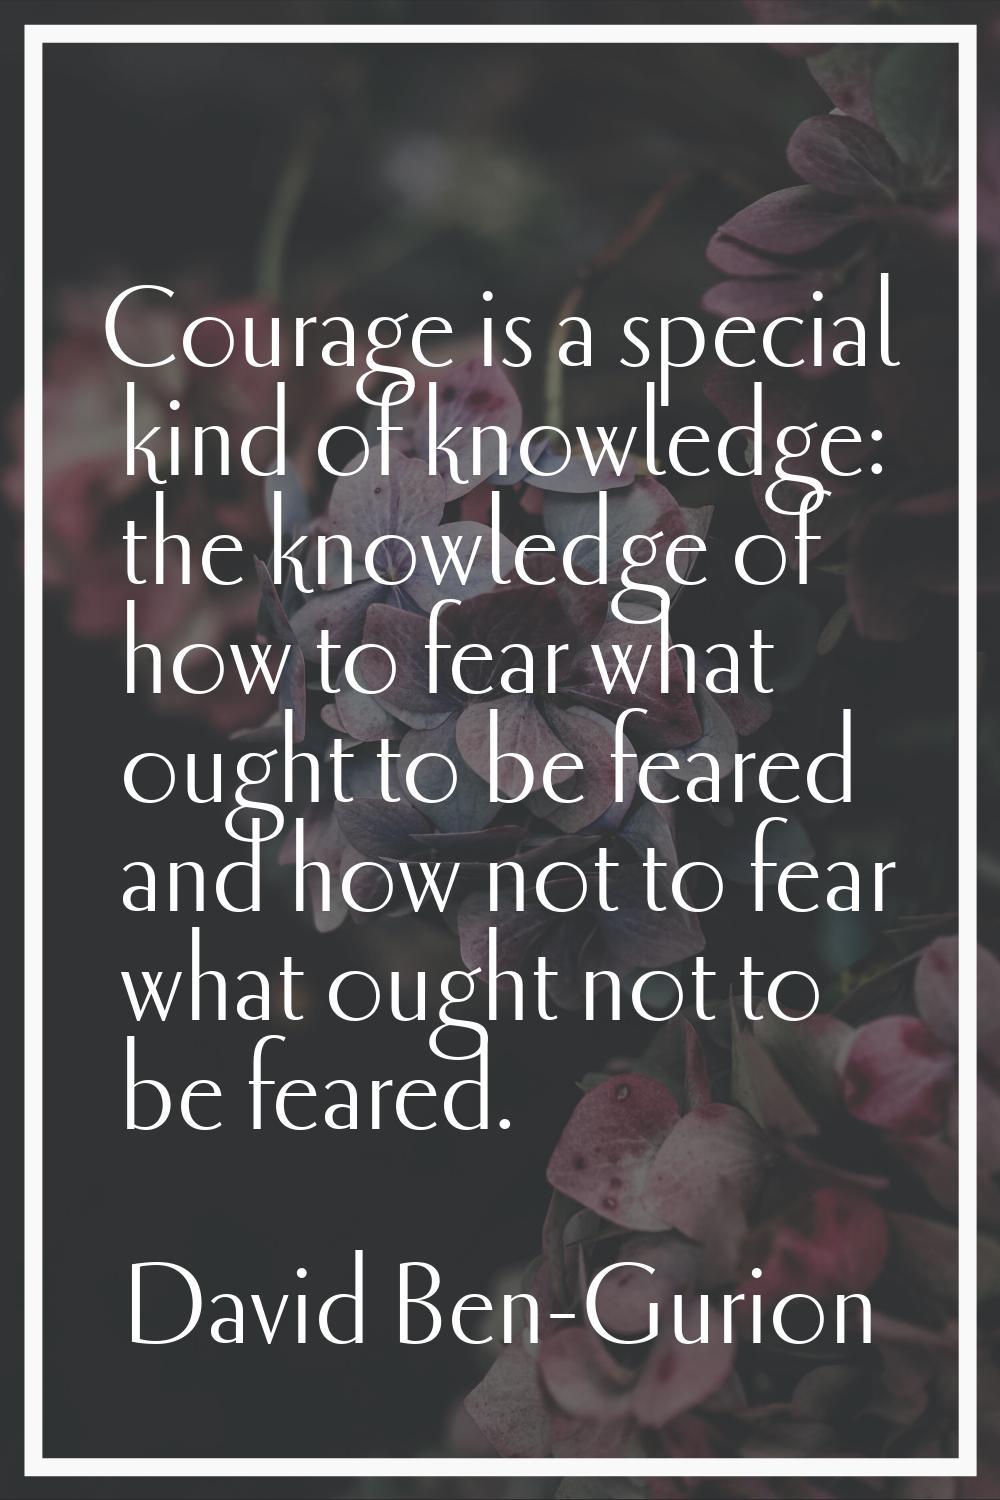 Courage is a special kind of knowledge: the knowledge of how to fear what ought to be feared and ho